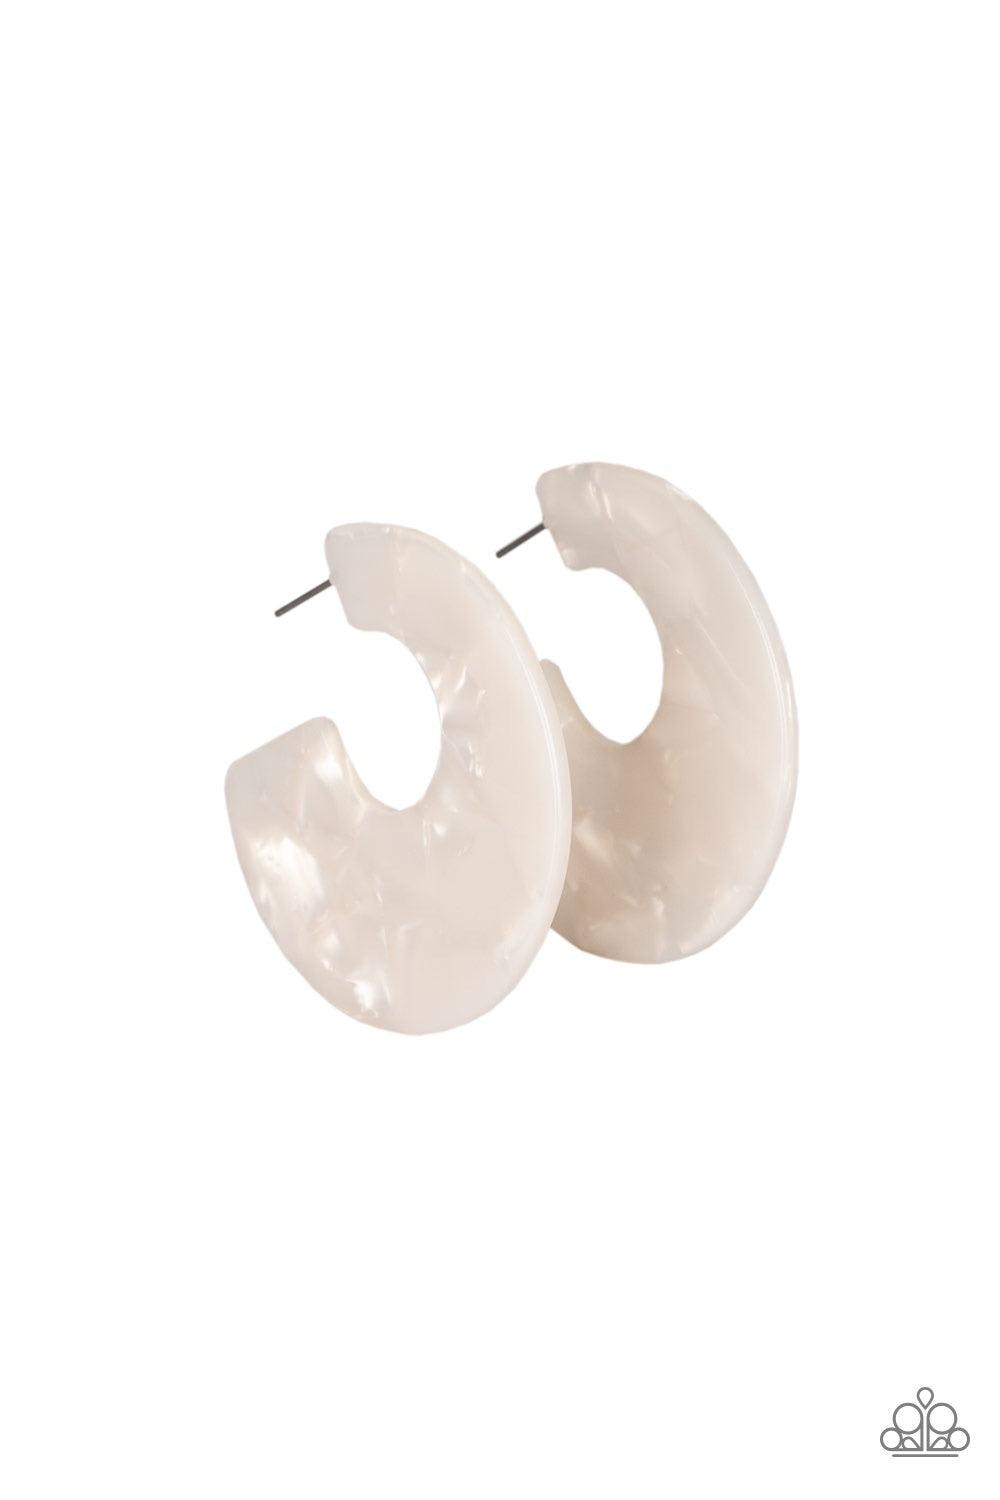 Paparazzi Accessories Tropically Torrid - White Brushed in an iridescent faux marble finish, a flat white hoop curls around the ear for a retro look. Earring attaches to a standard post fitting. Hoop measures 2" in diameter. Jewelry